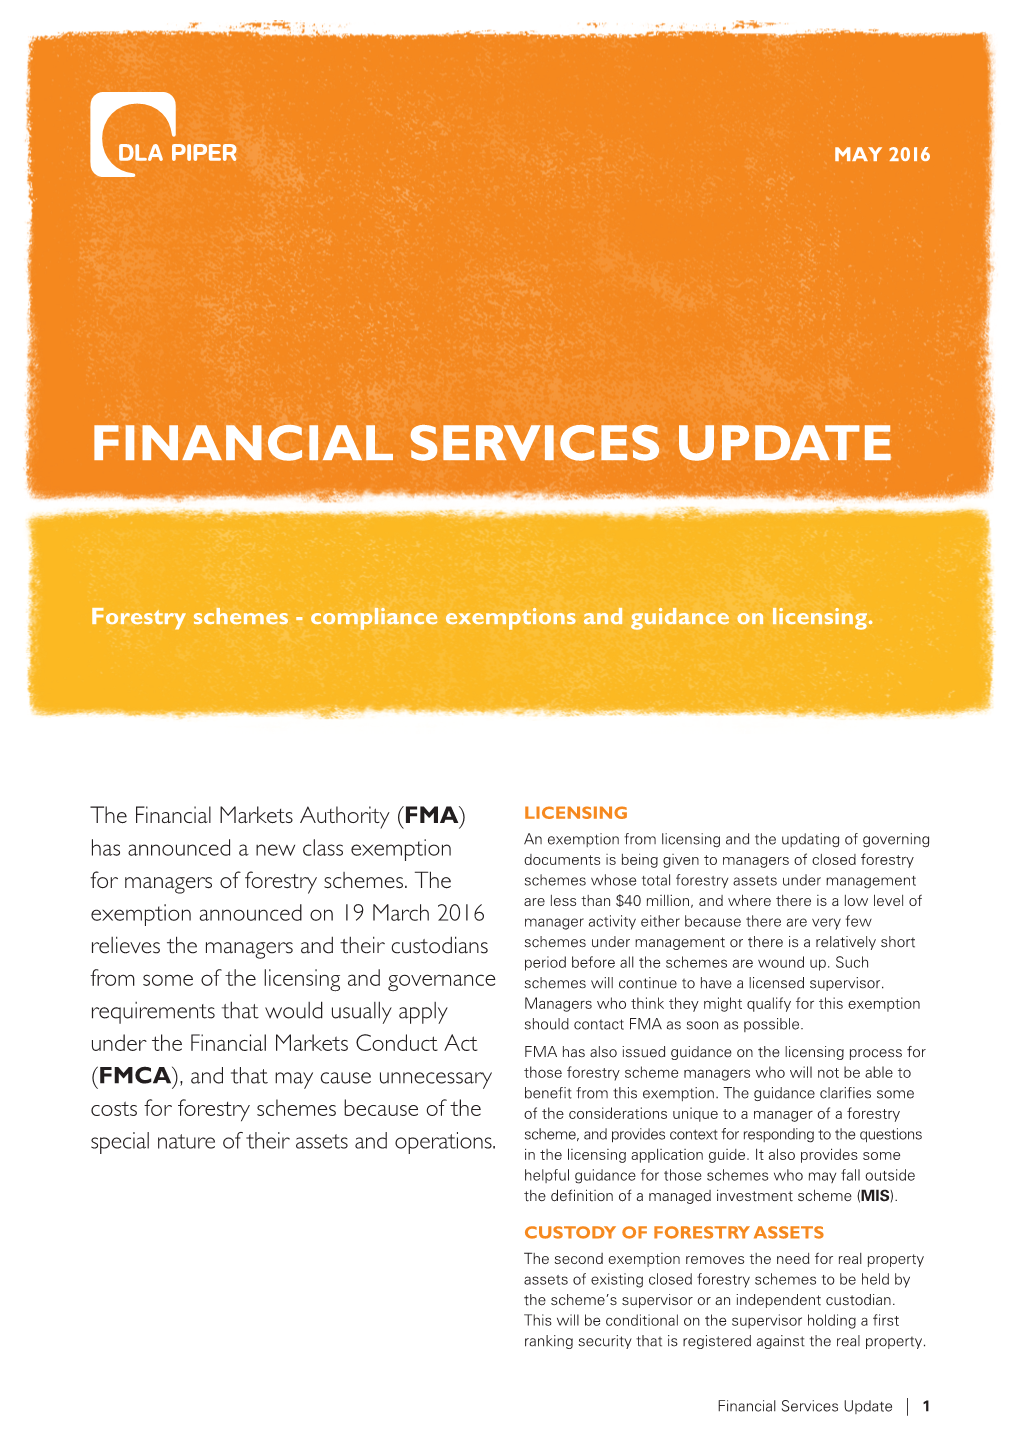 Financial Services Update